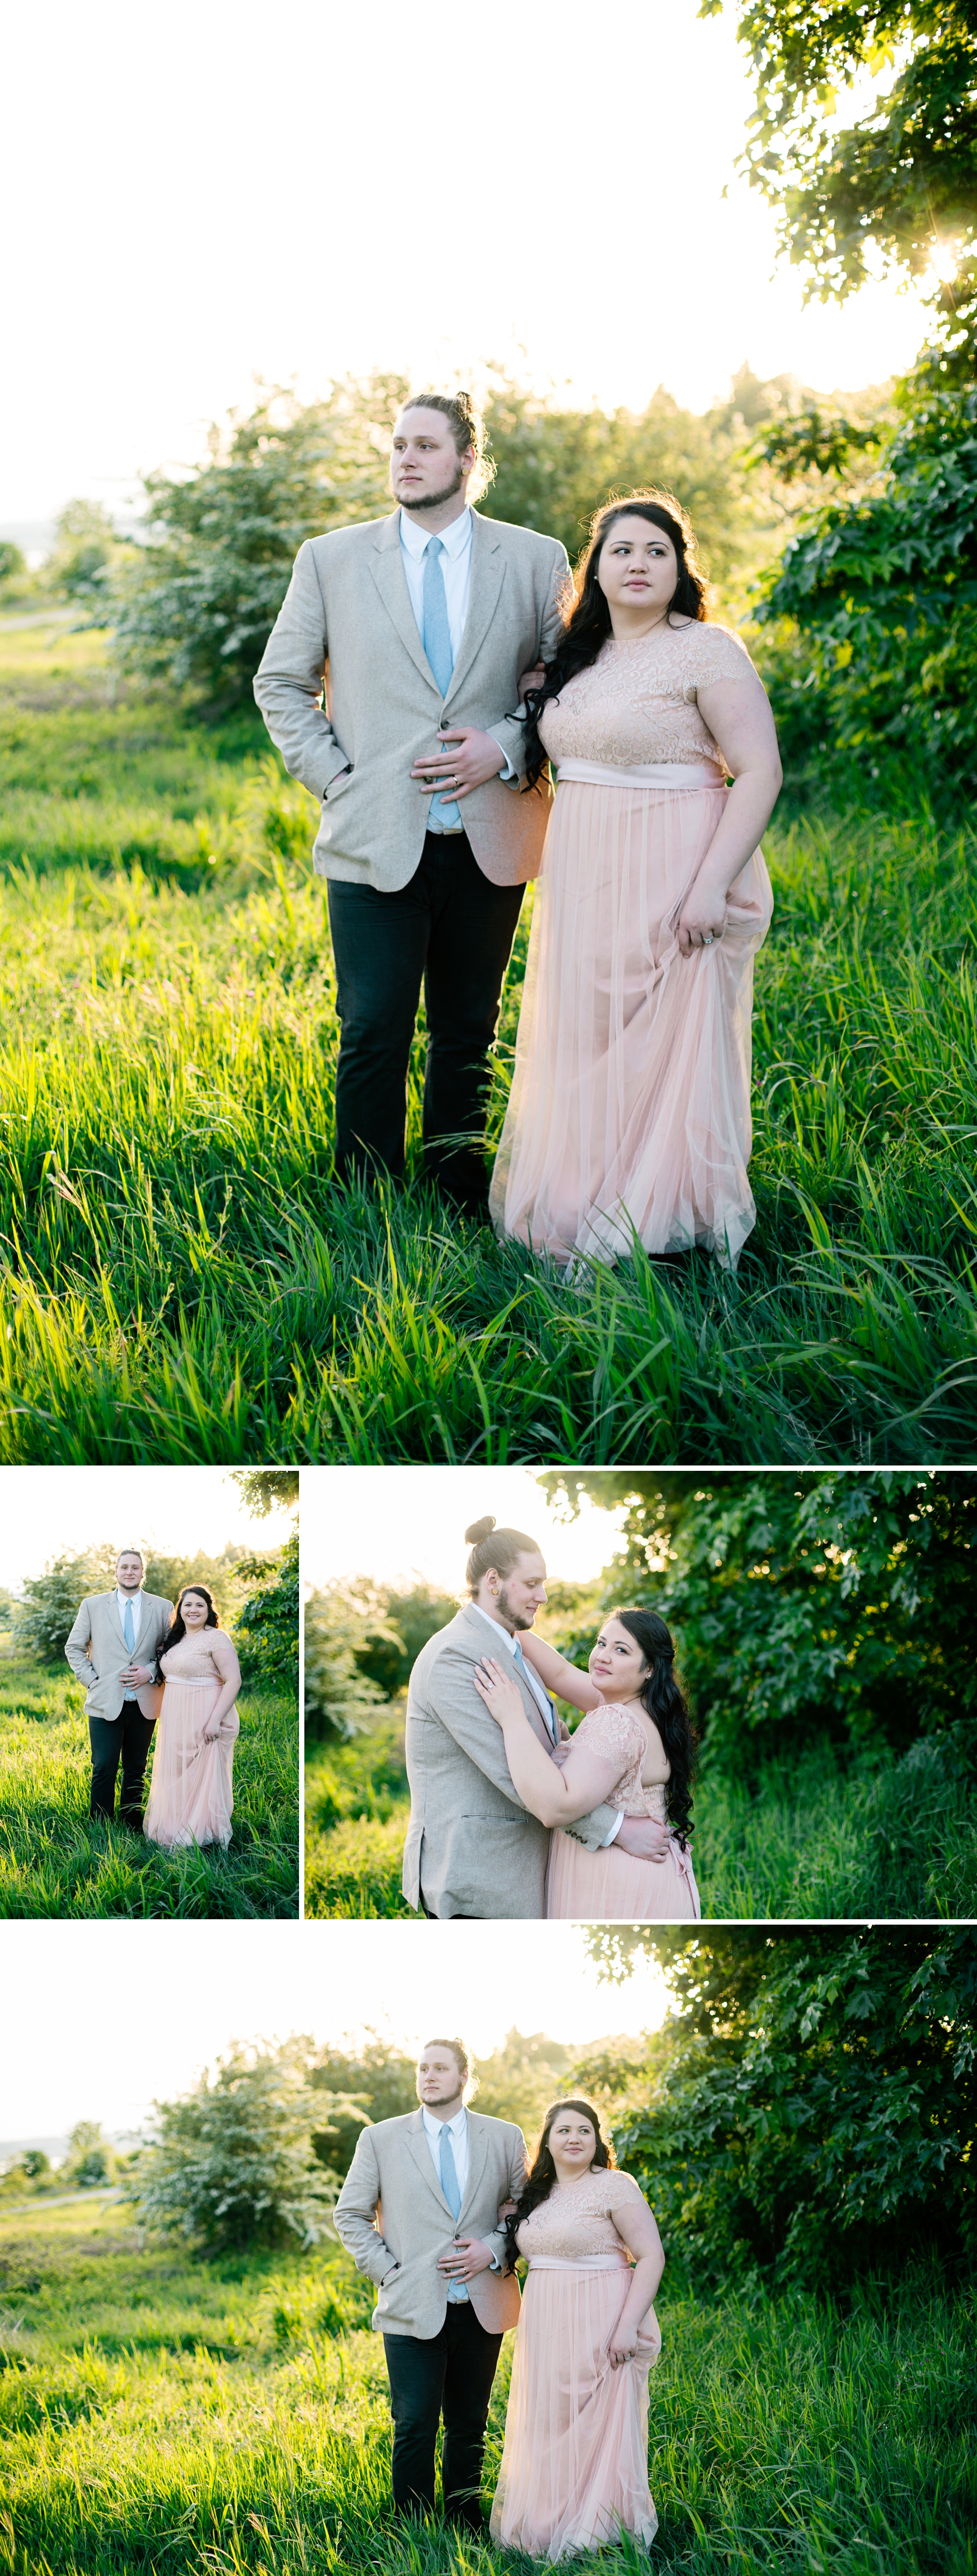 29-Bride-Groom-Elopement-Discovery-Park-Rustic-Meadow-Open-Field-Seattle-Sunset-Photographer-Wedding-Photography-by-Betty-Elaine-Blush-BHLDN-Wedding-Gown-Dress